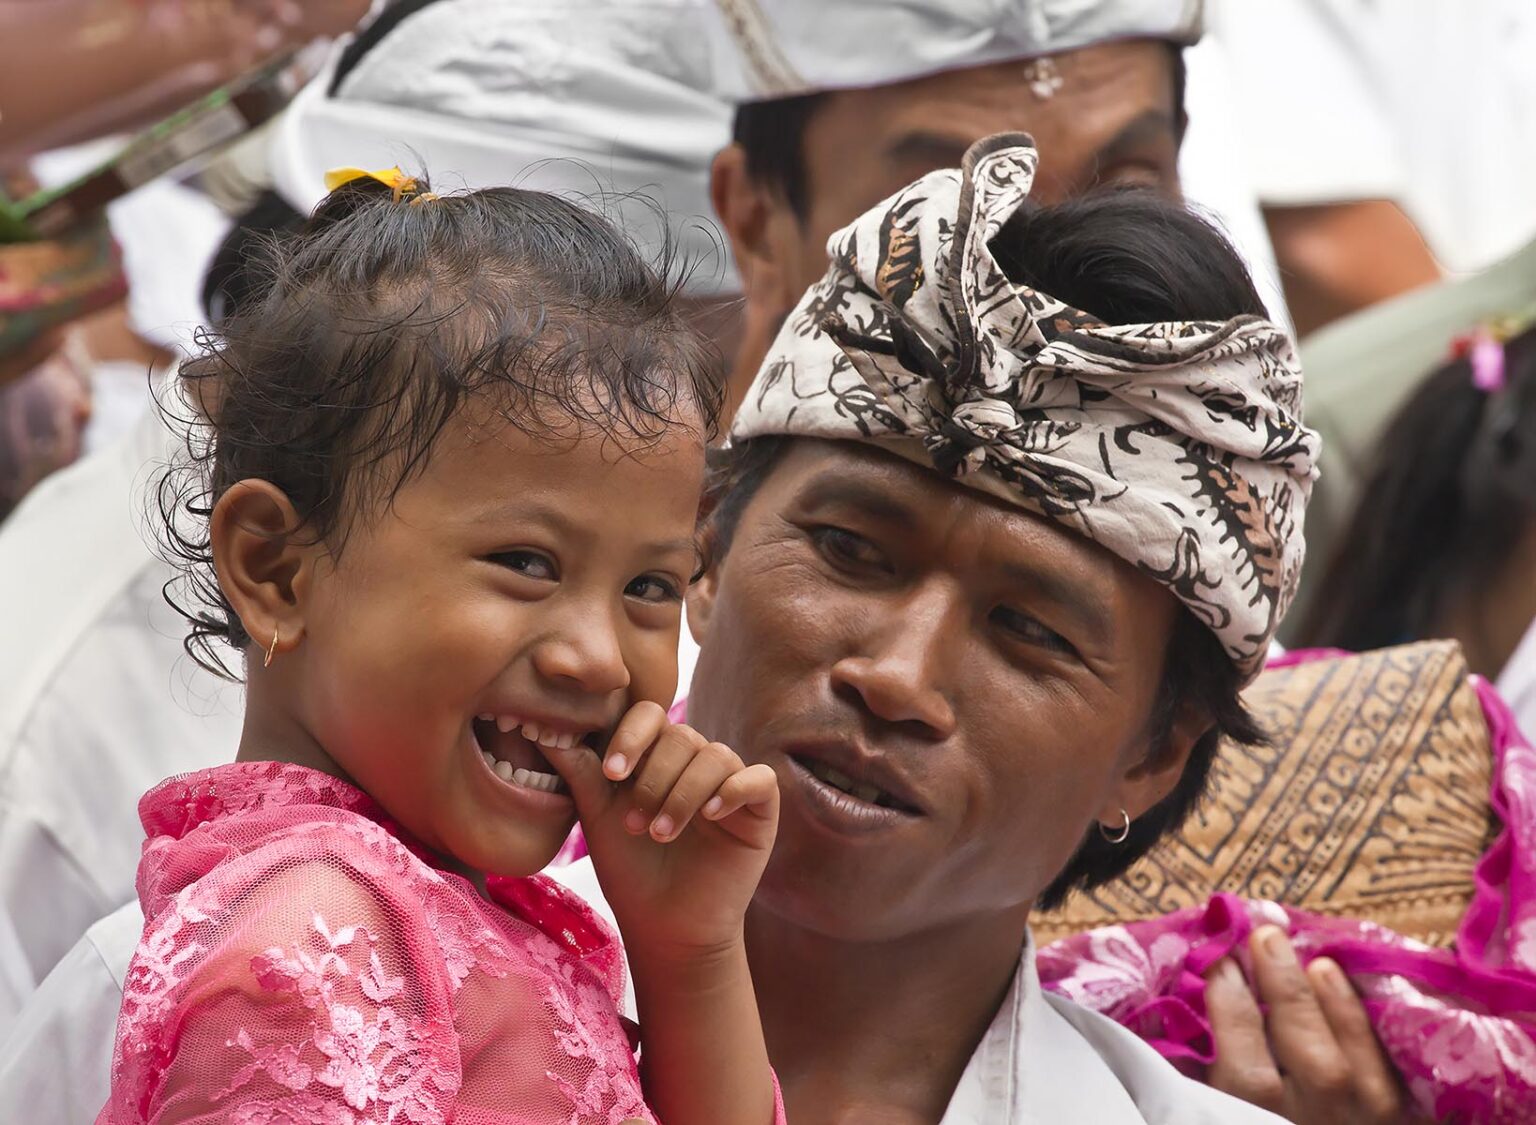 A BALINESE father and daughter at PURA BEJI in the village of Mas during the GALUNGAN FESTIVAL - UBUD, BALI, INDONESIA